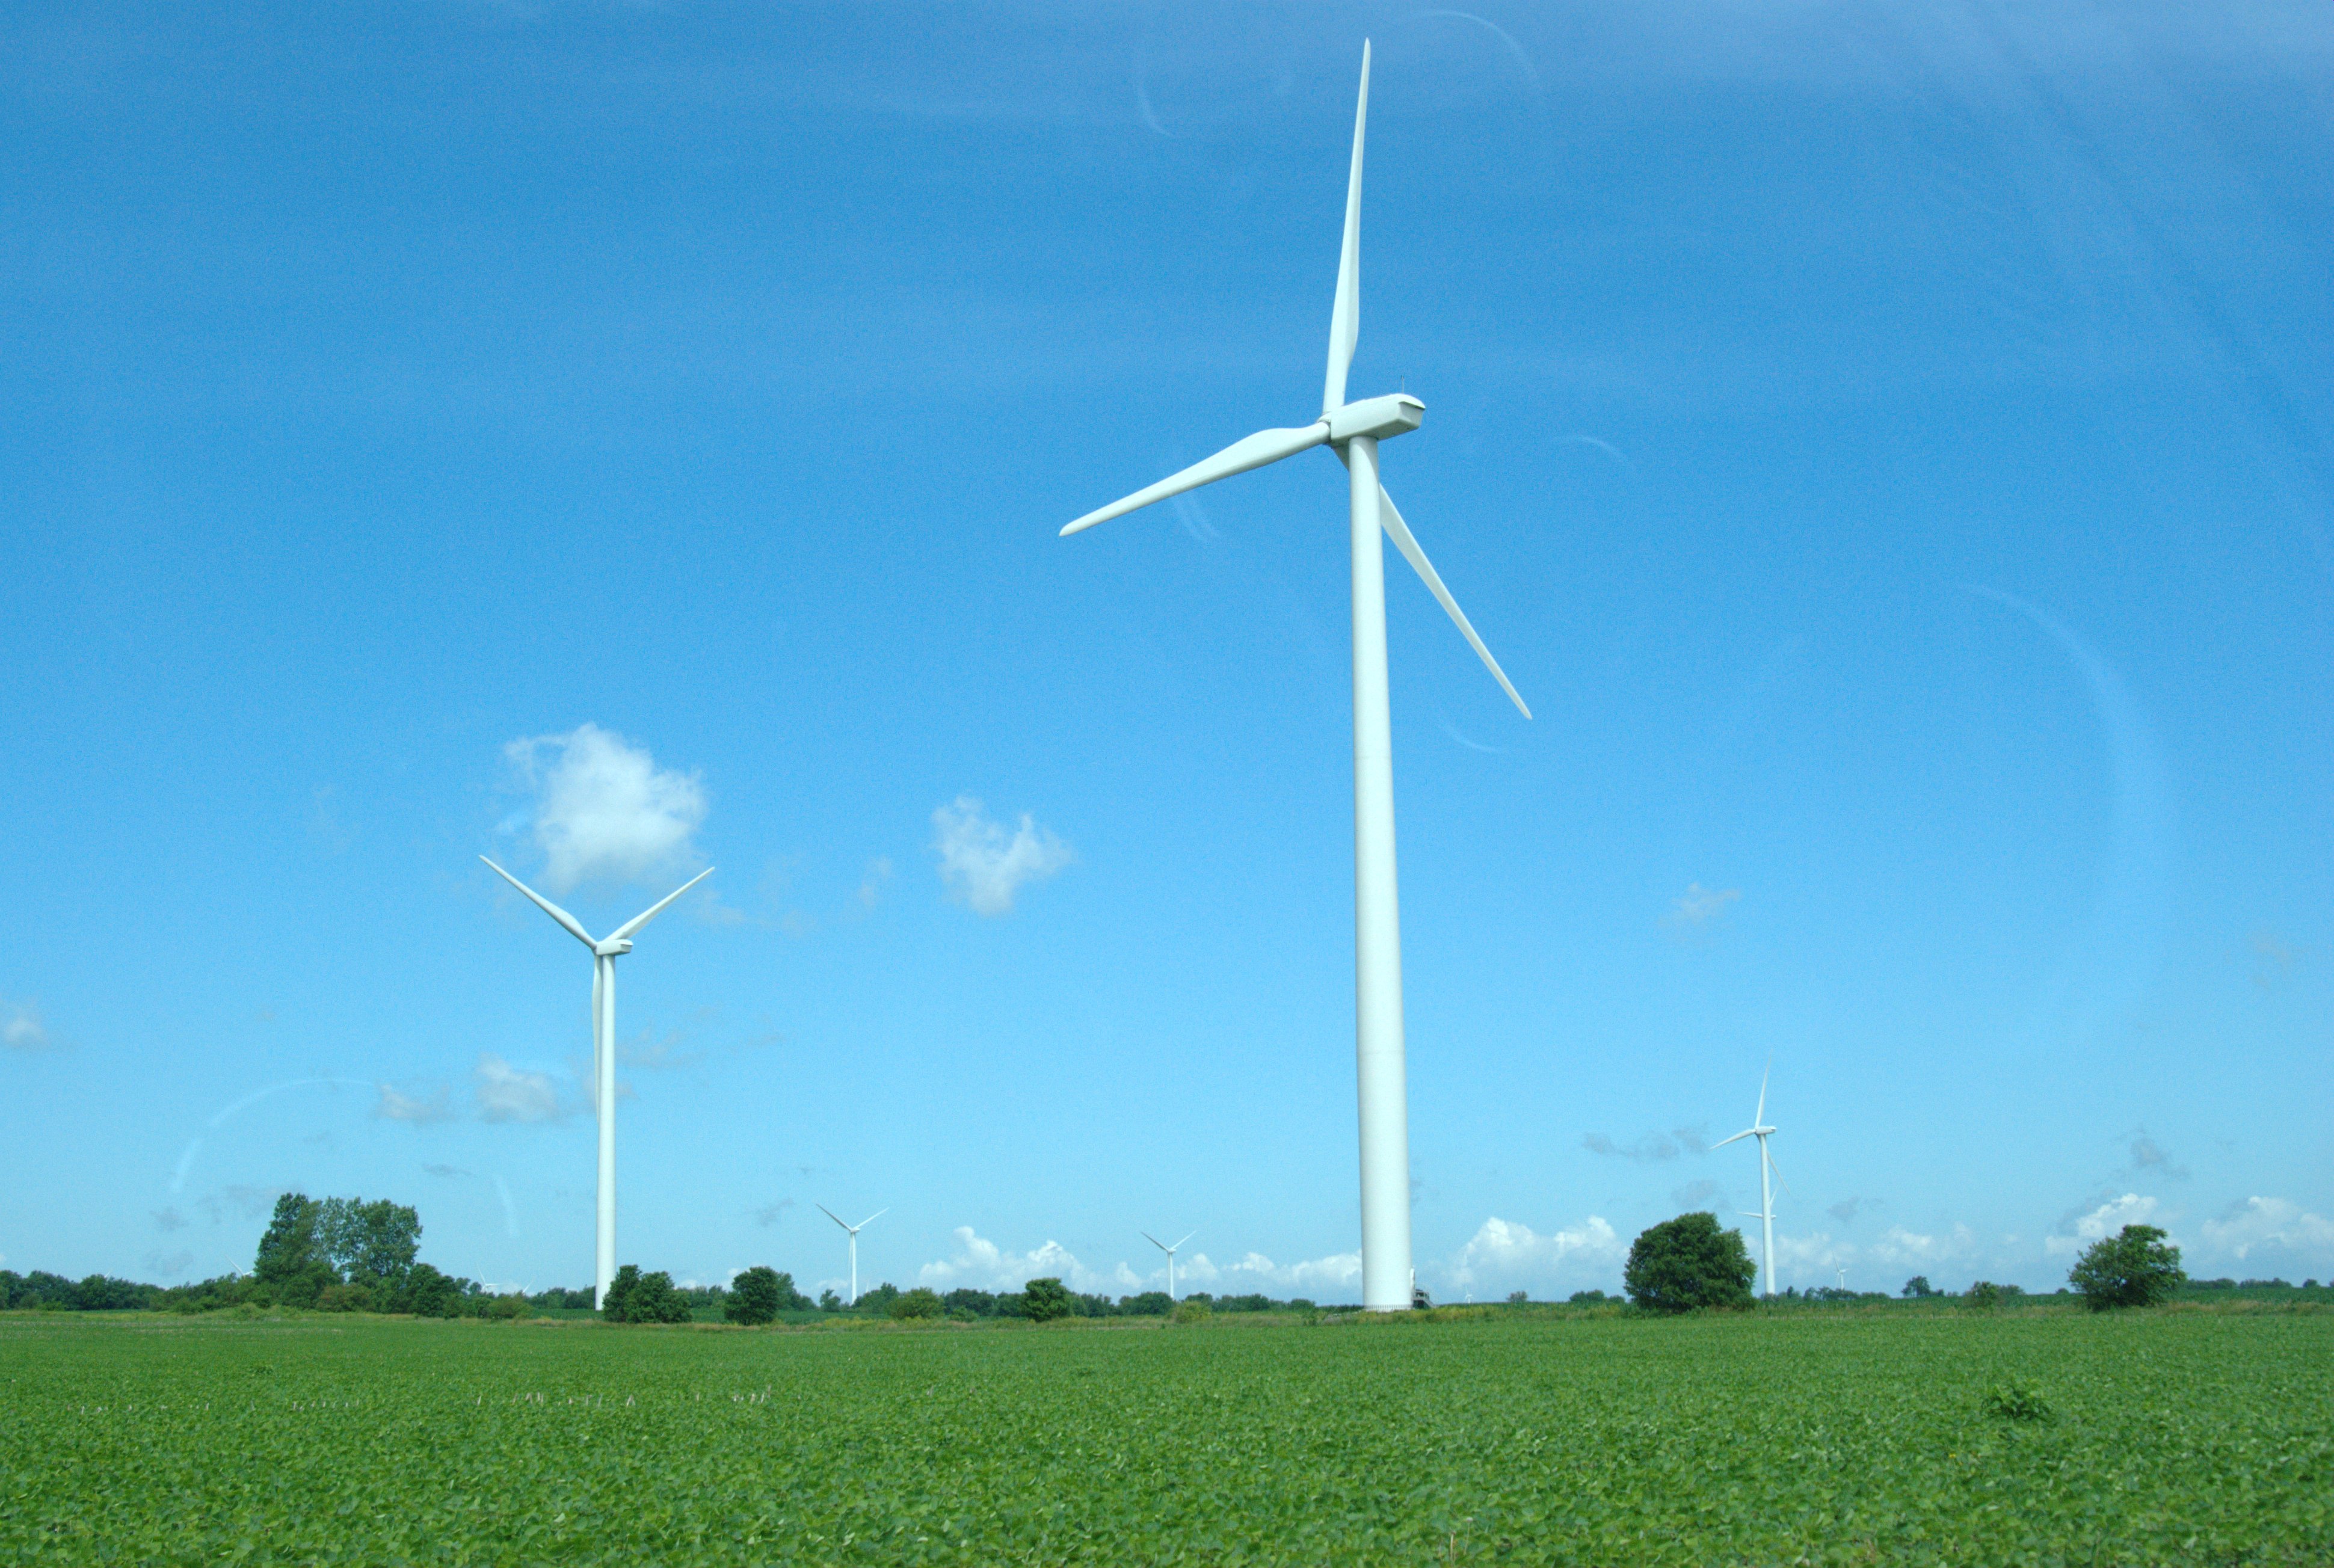  turbines can be used to create energy without polluting our planet